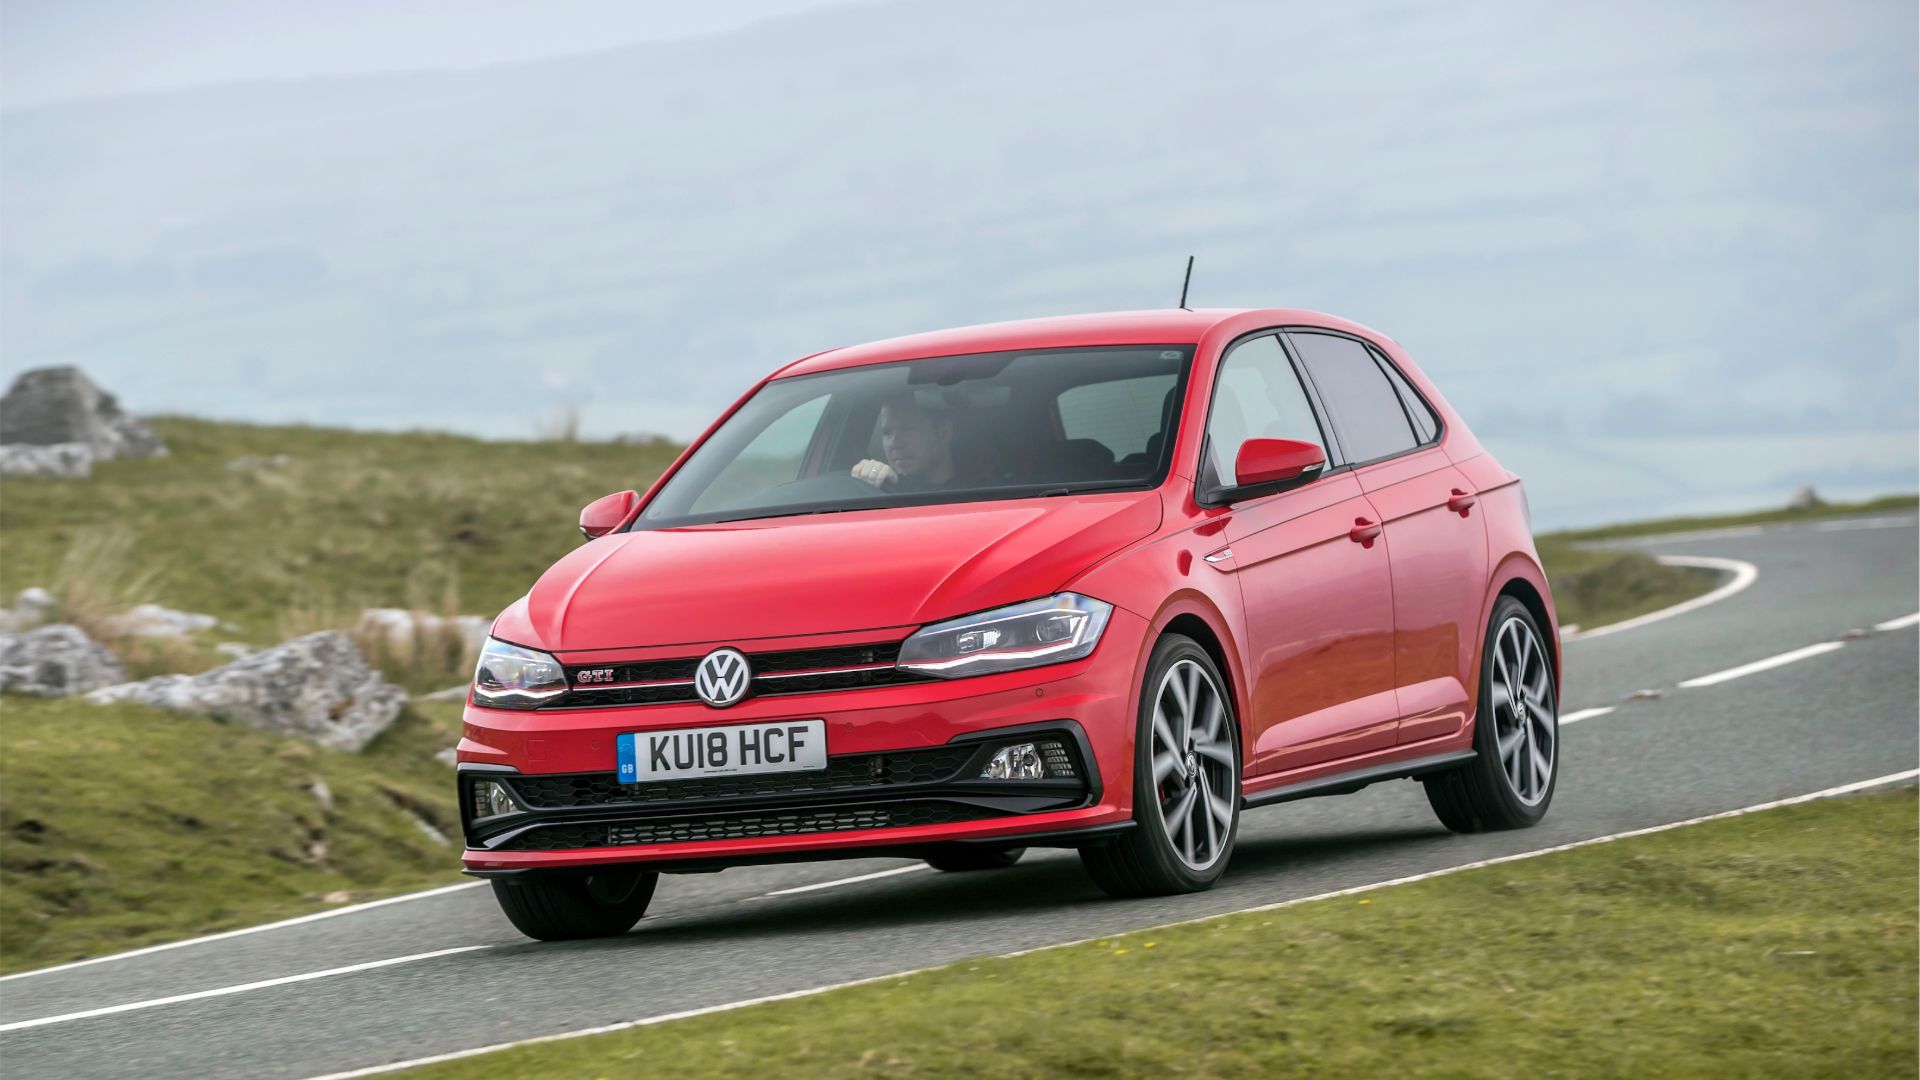 Volkswagen Polo Gti 2020 Review